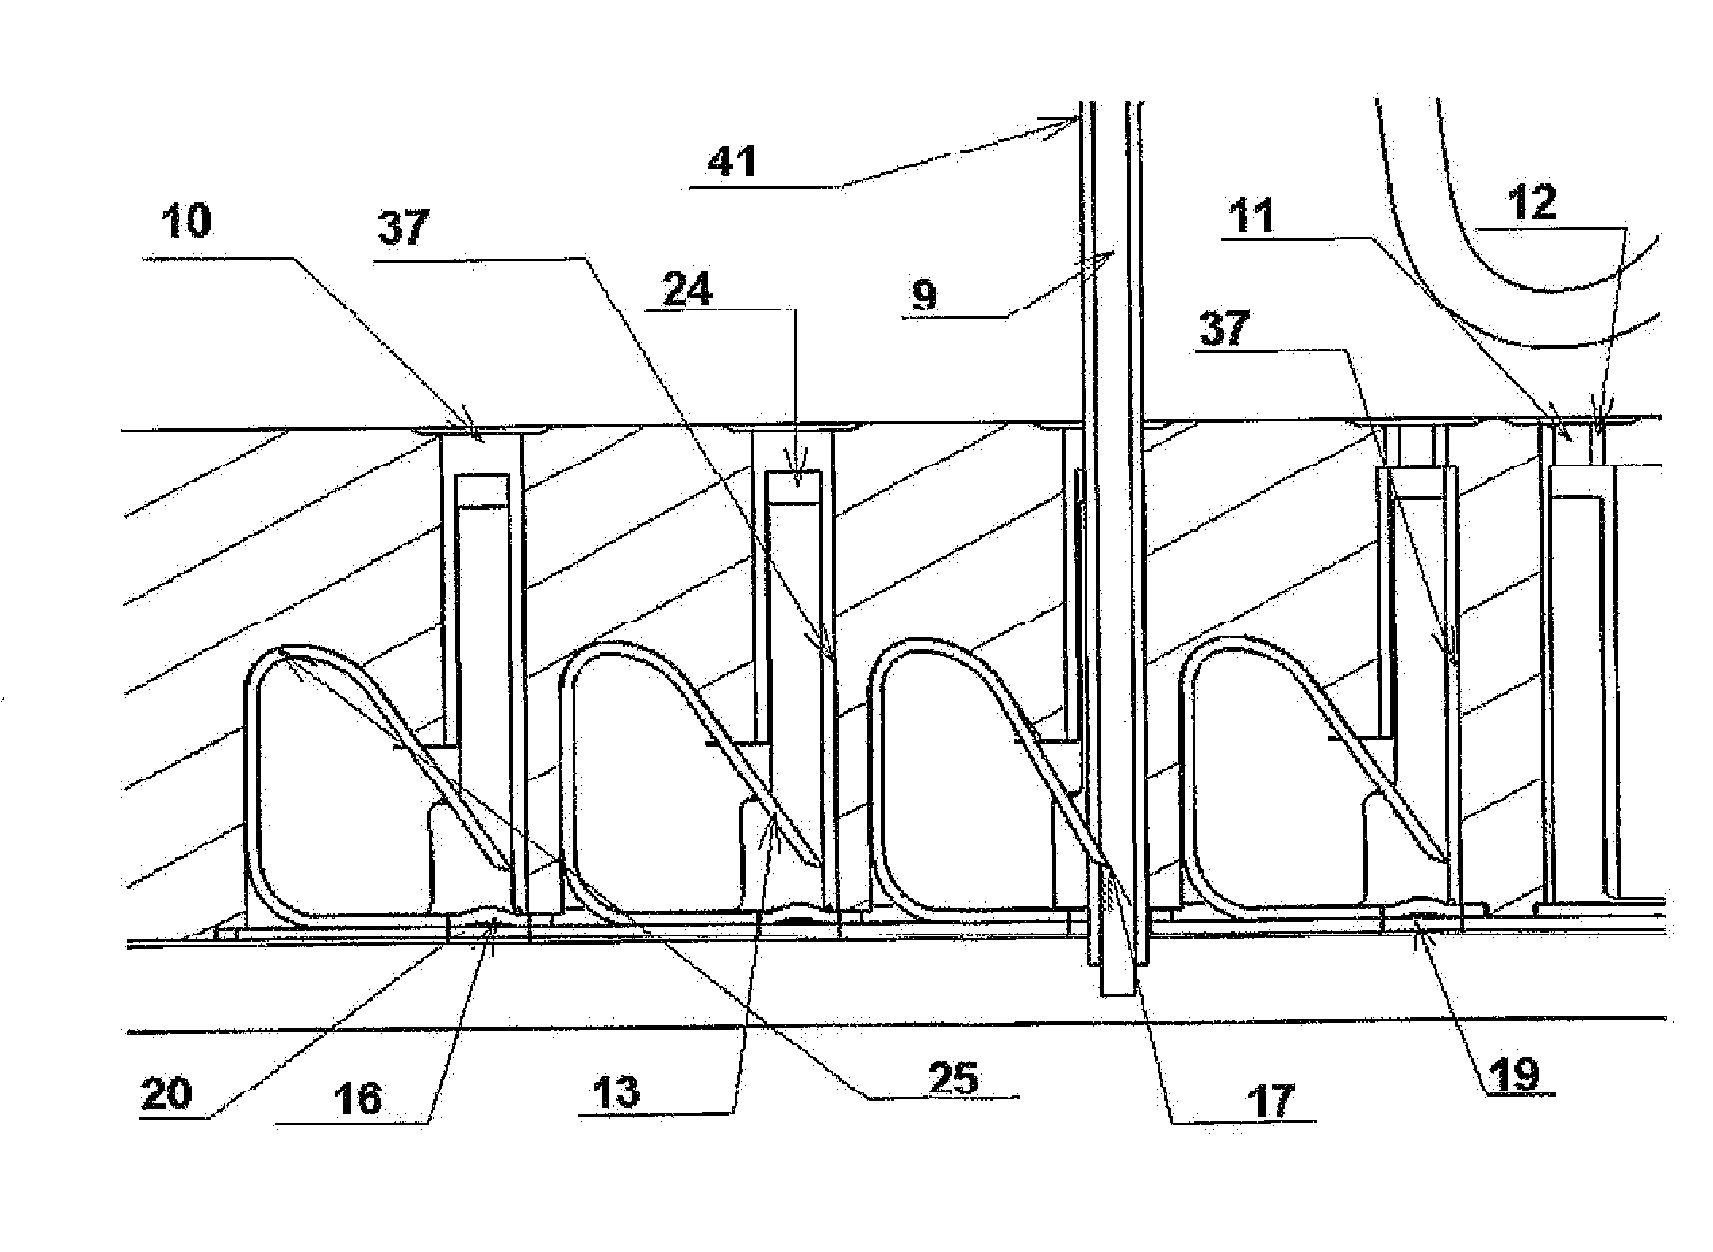 Card for interconnecting electronic components using insulated cable or wire